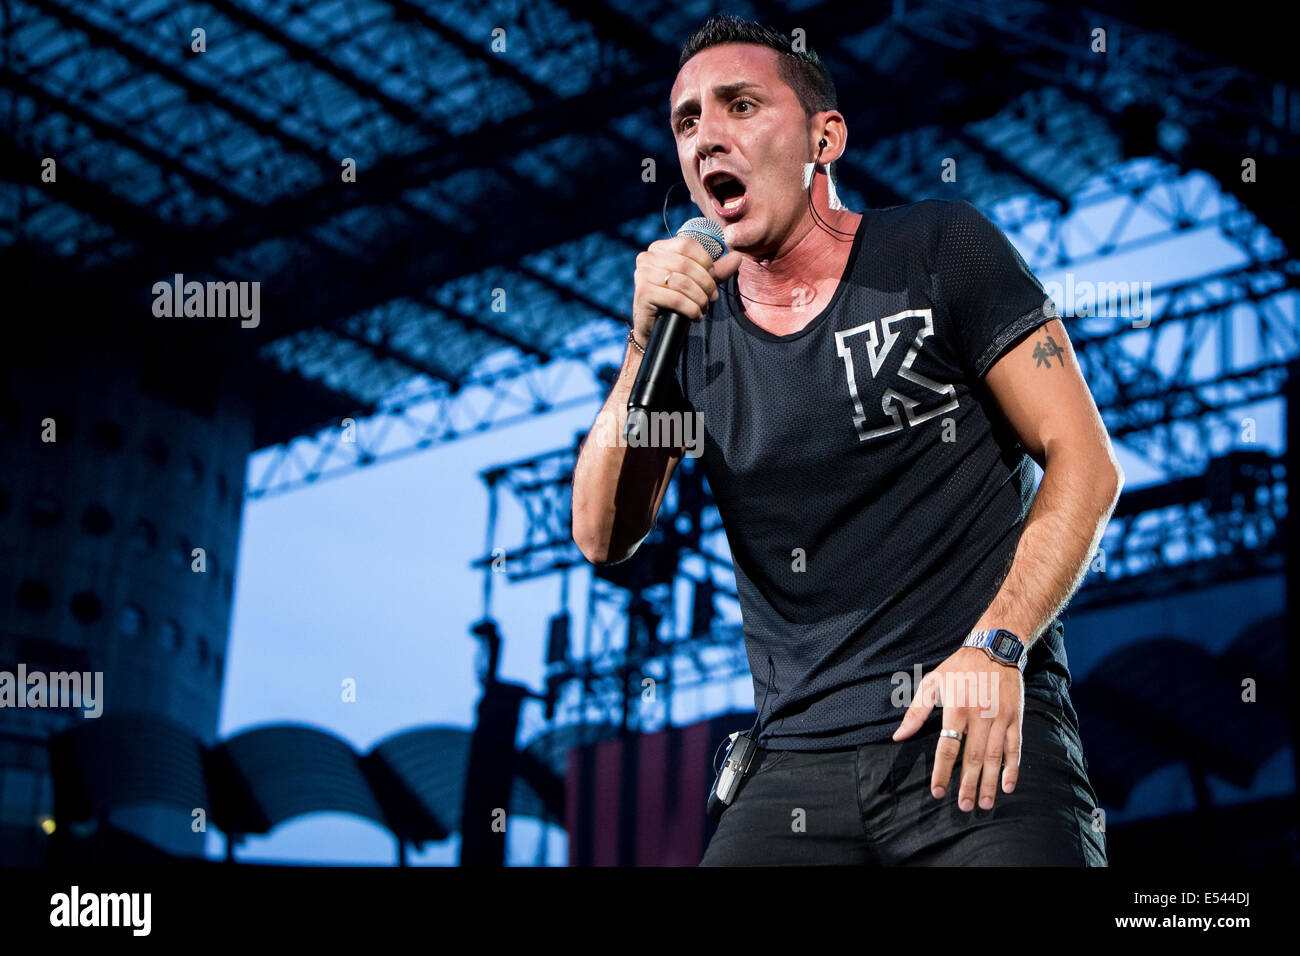 Milan, Italy. 19th July 2014. The Italian rock band MODA' performs live at Stadio San Siro during the "Stadi Tour 2014" Credit: Rodolfo Live News Stock - Alamy